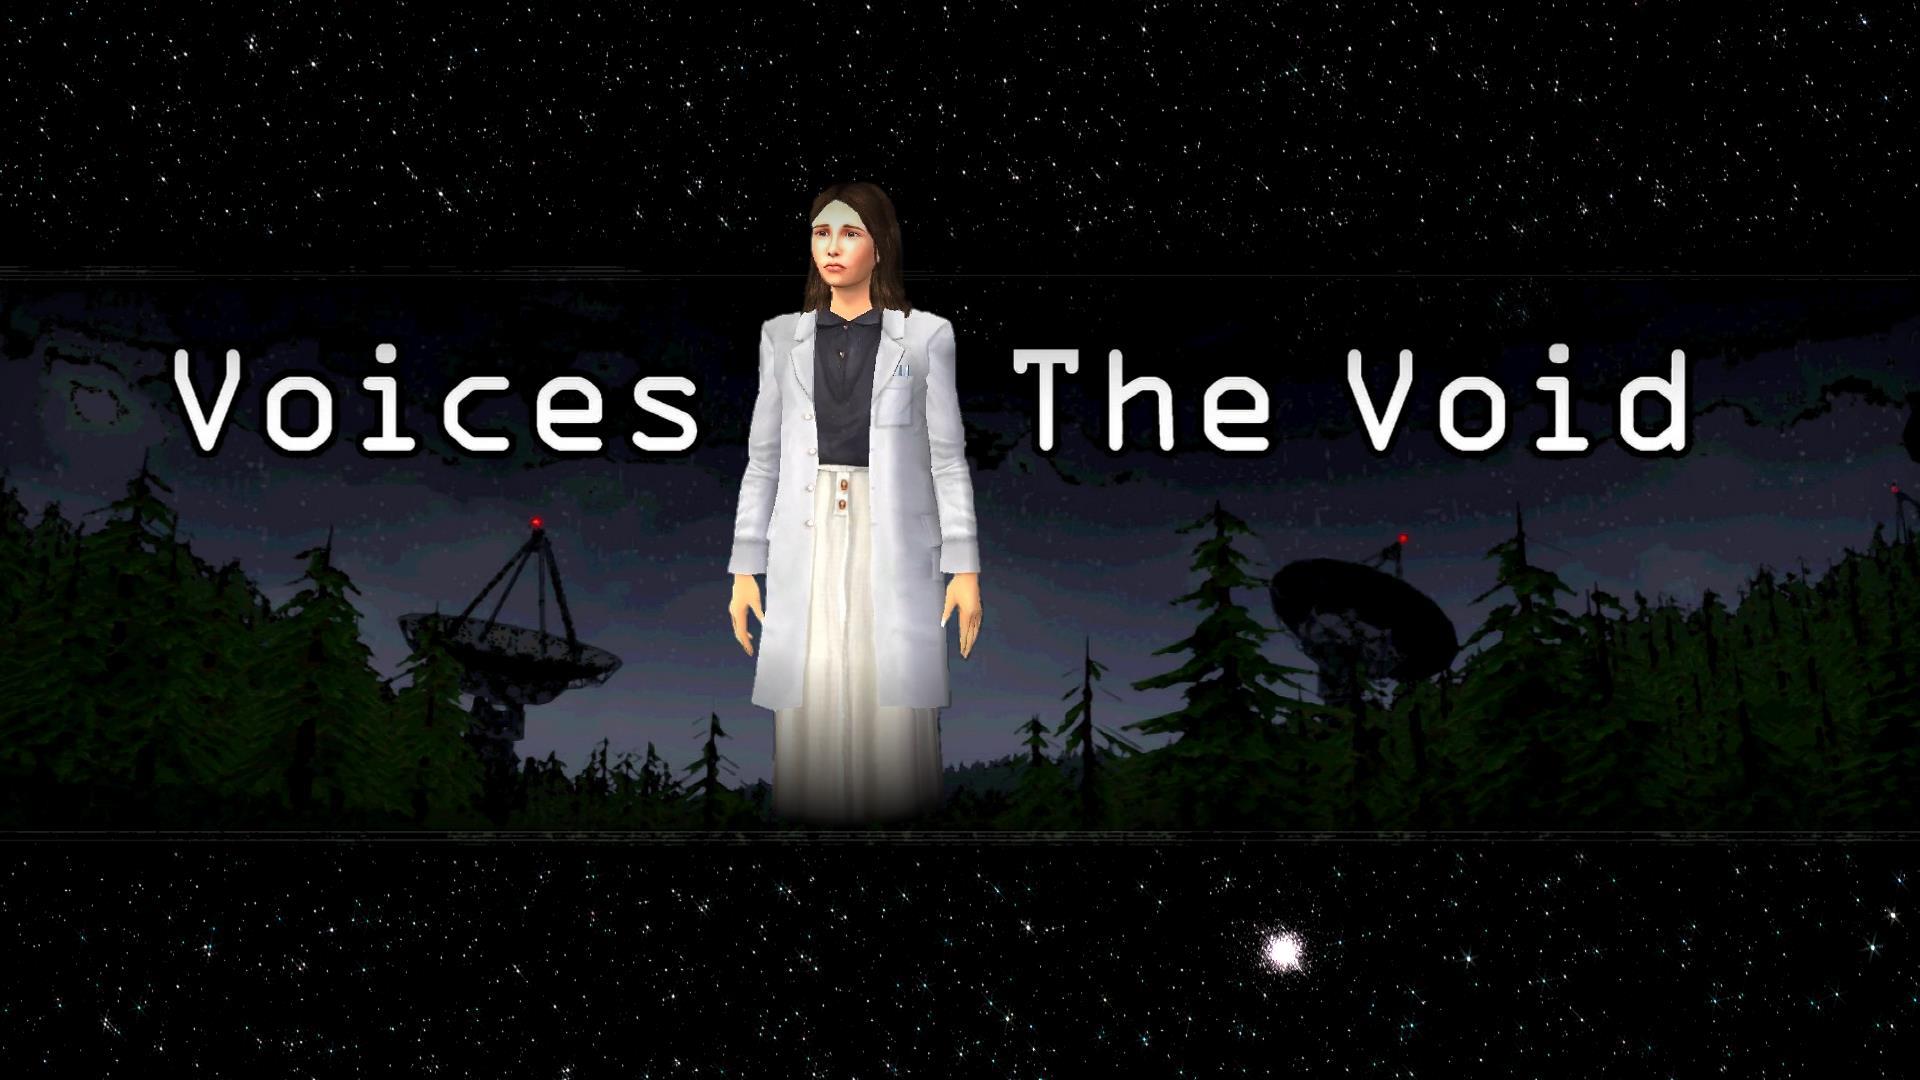 Voices of the Void игра. Voices of the Void моды. Сны Voices of the Void. Voices of the Void русский язык. Voices of the void game